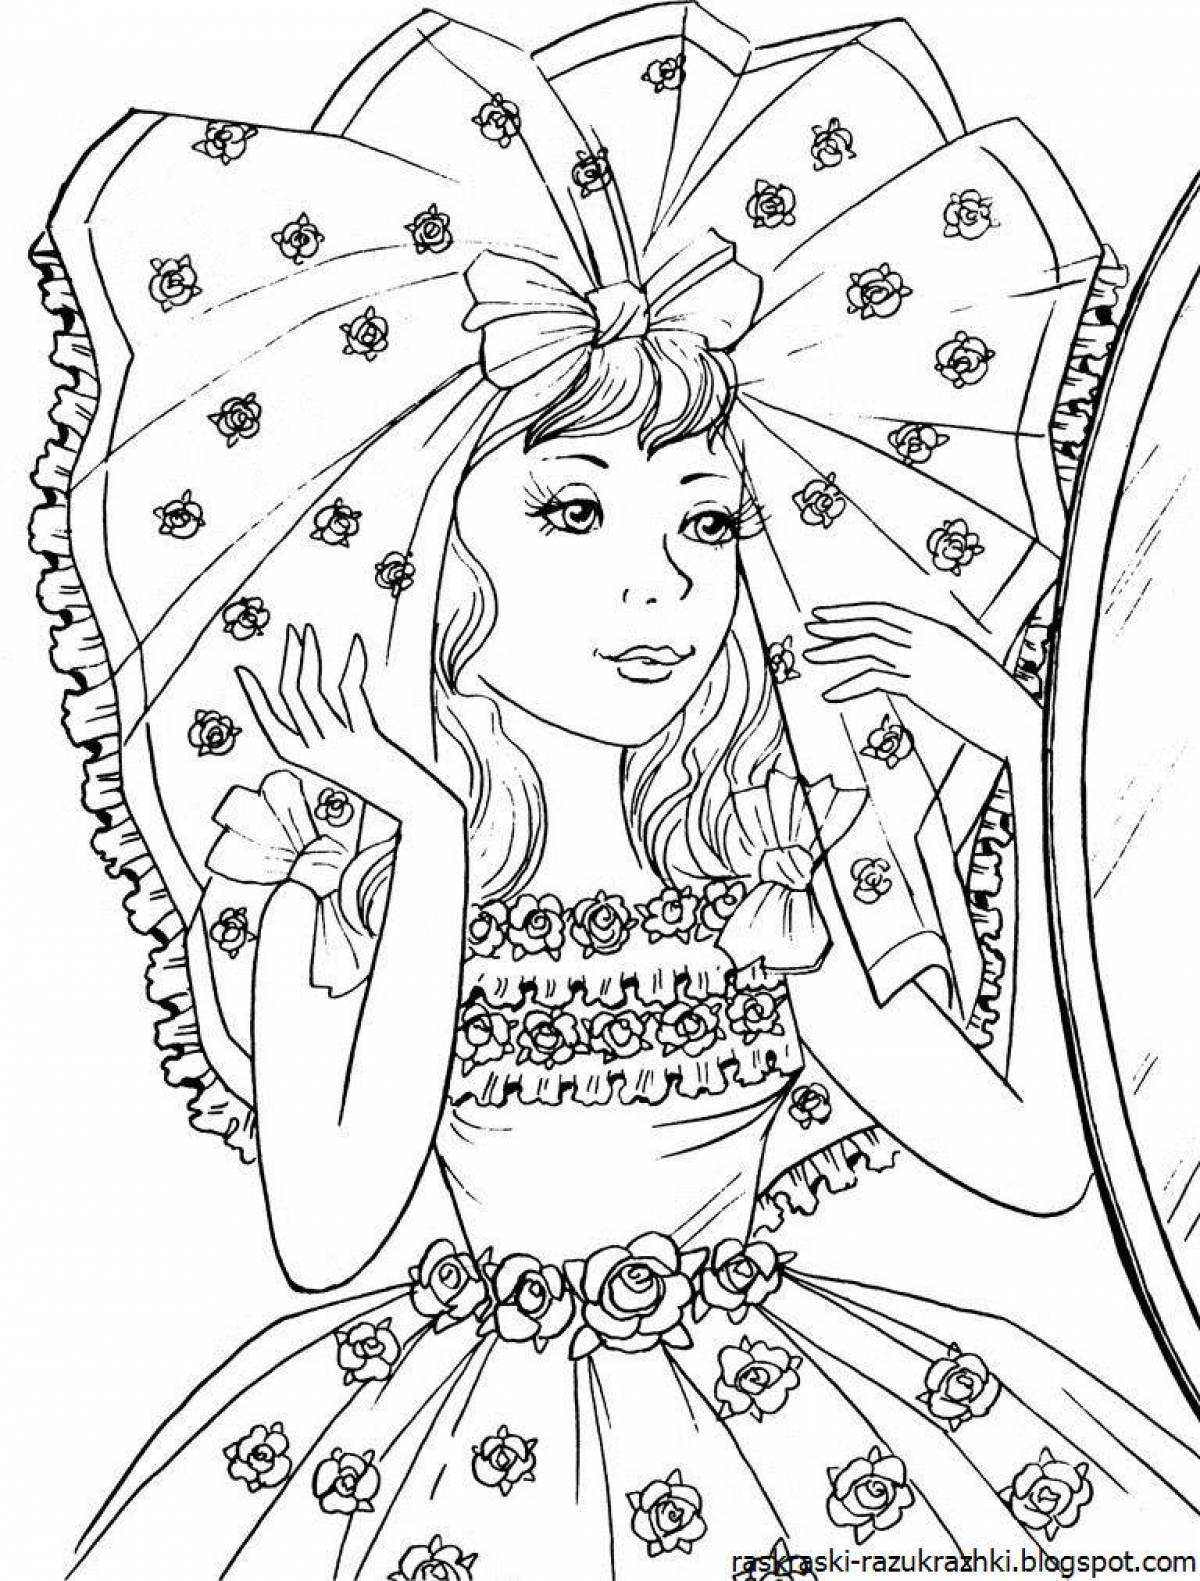 Nice girly coloring book